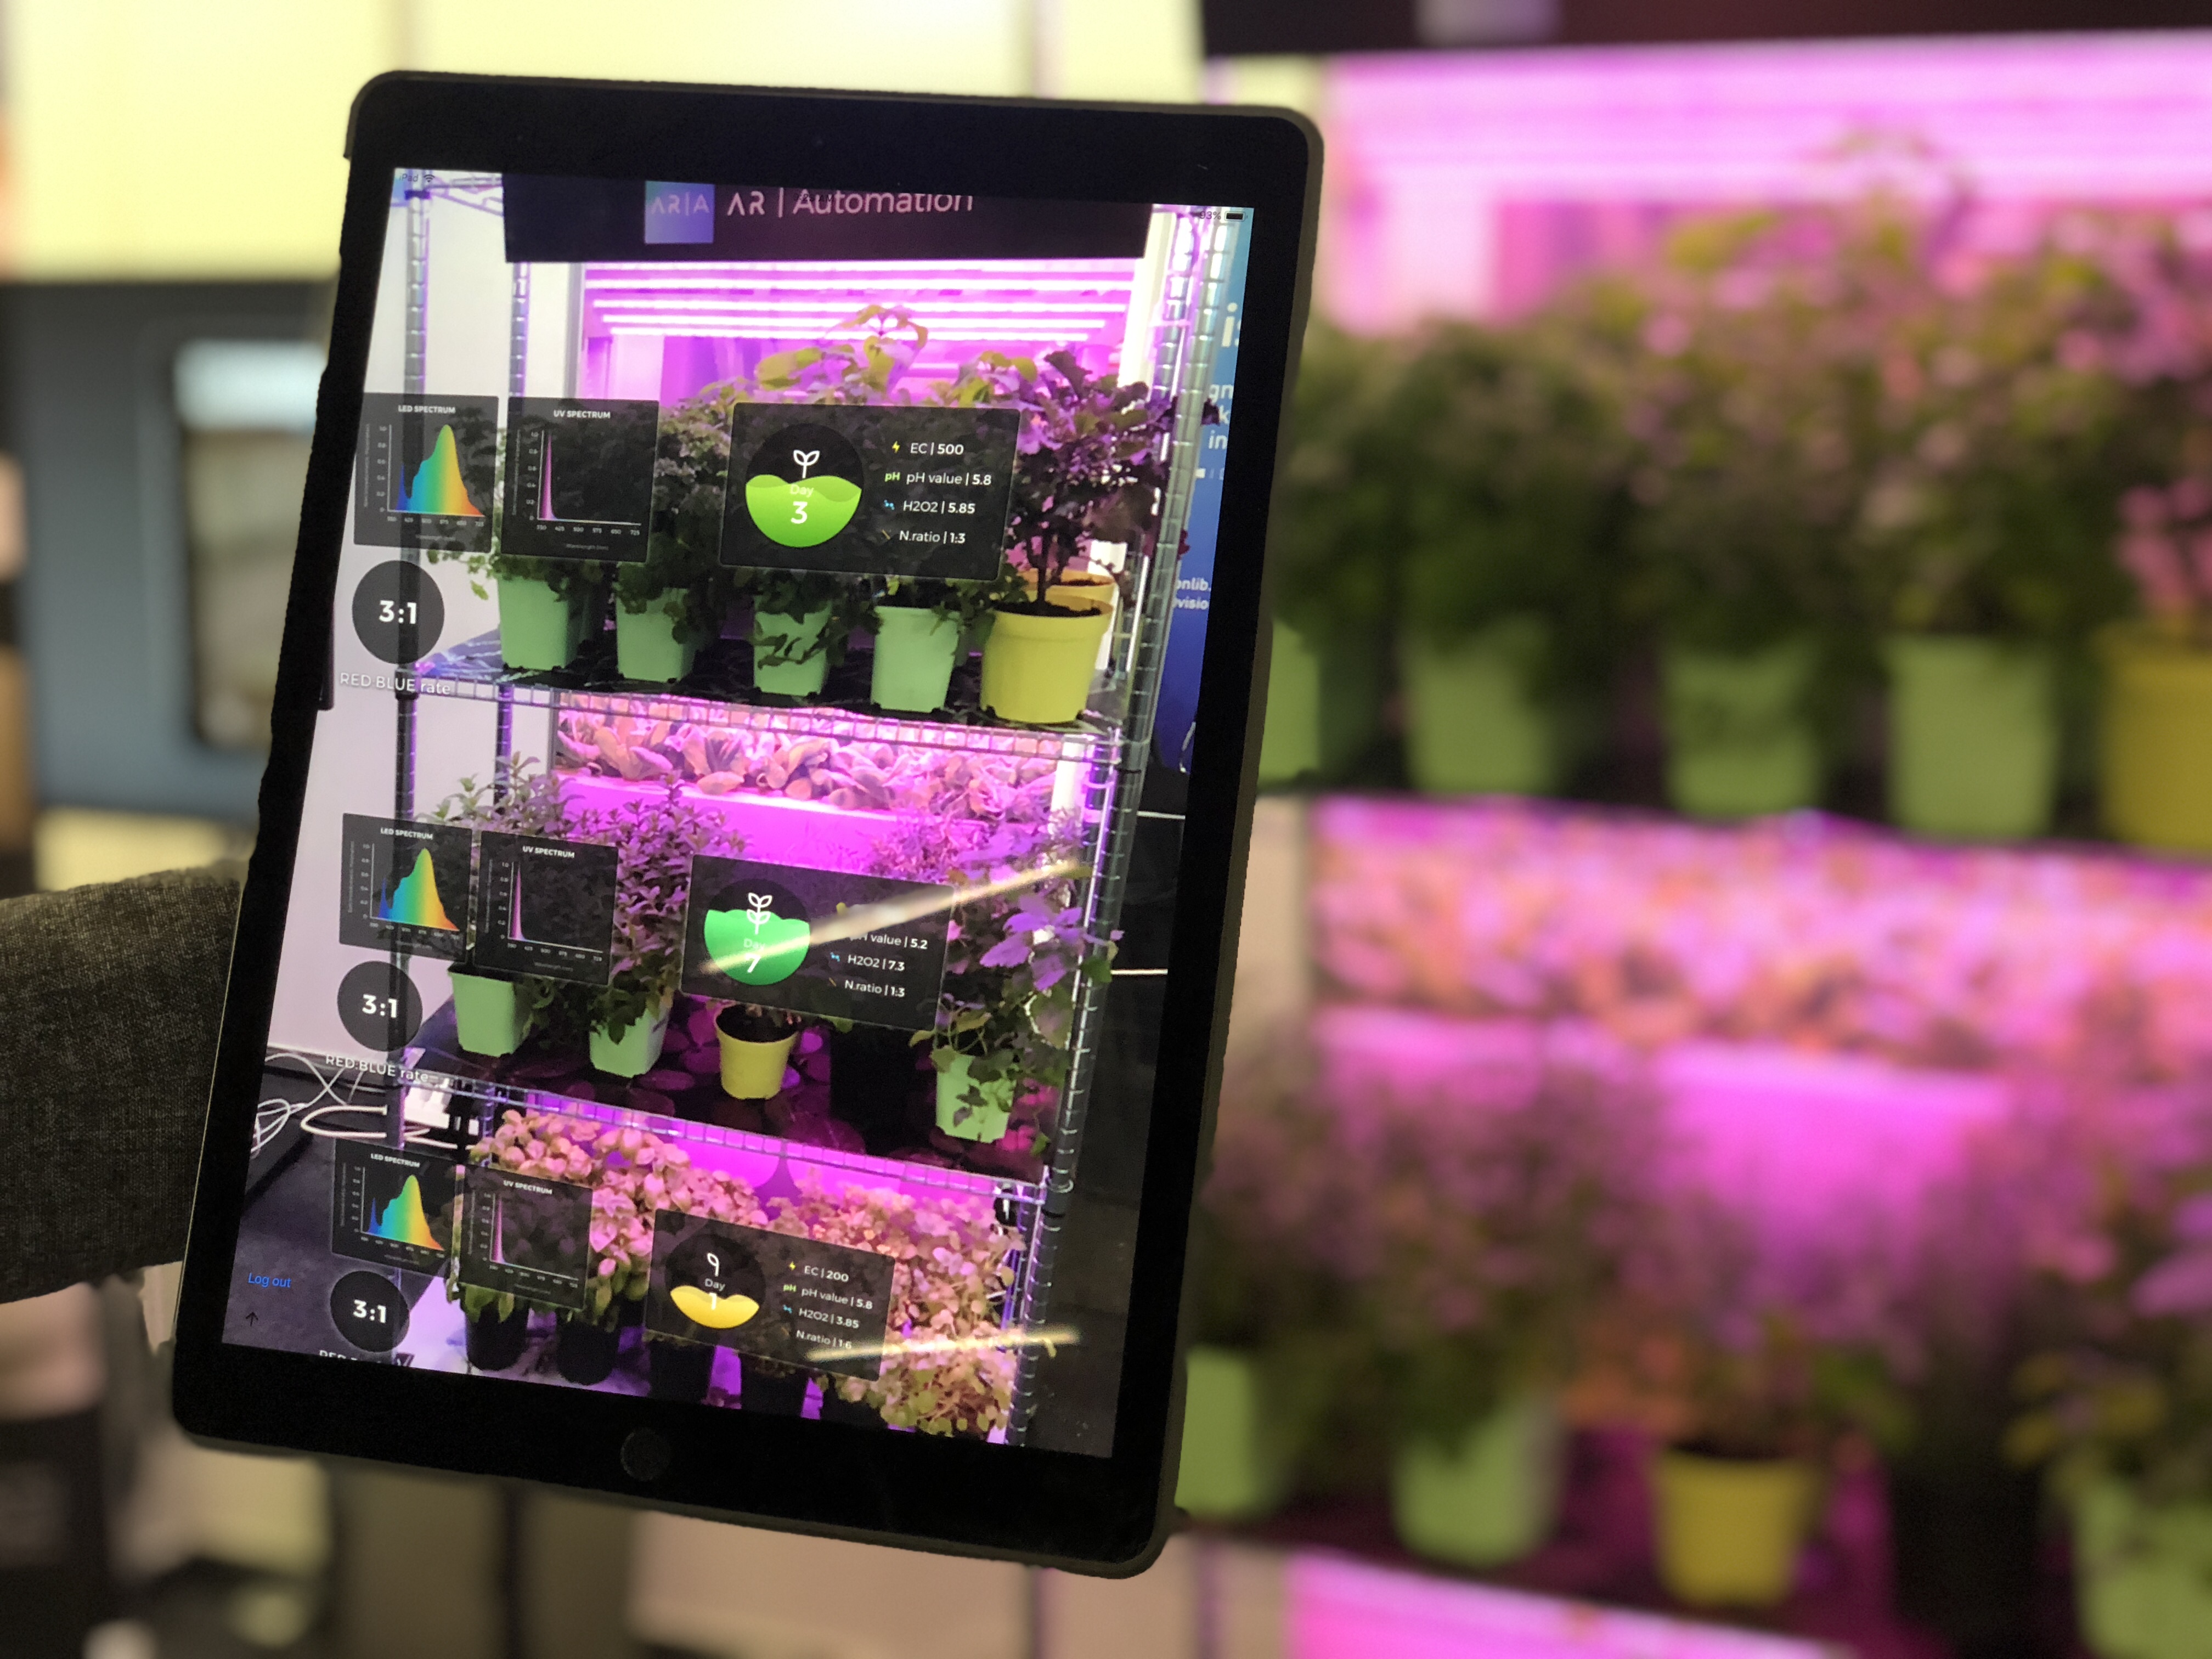 Presenting a game changer for the vertical farming industry